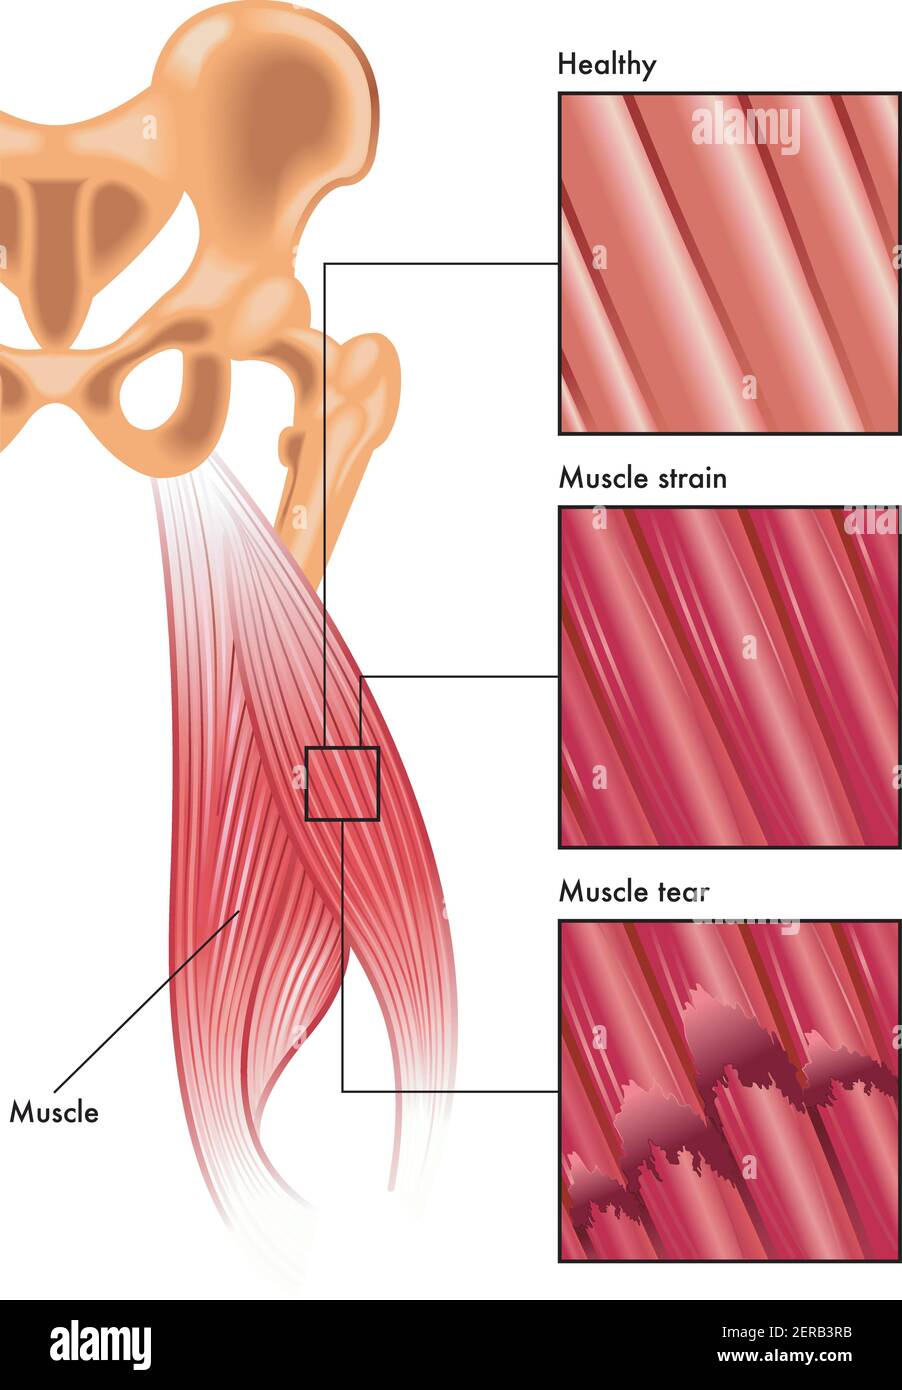 Medical illustration shows healthy muscle fibers compared to muscle strain and muscle tear. Stock Vector